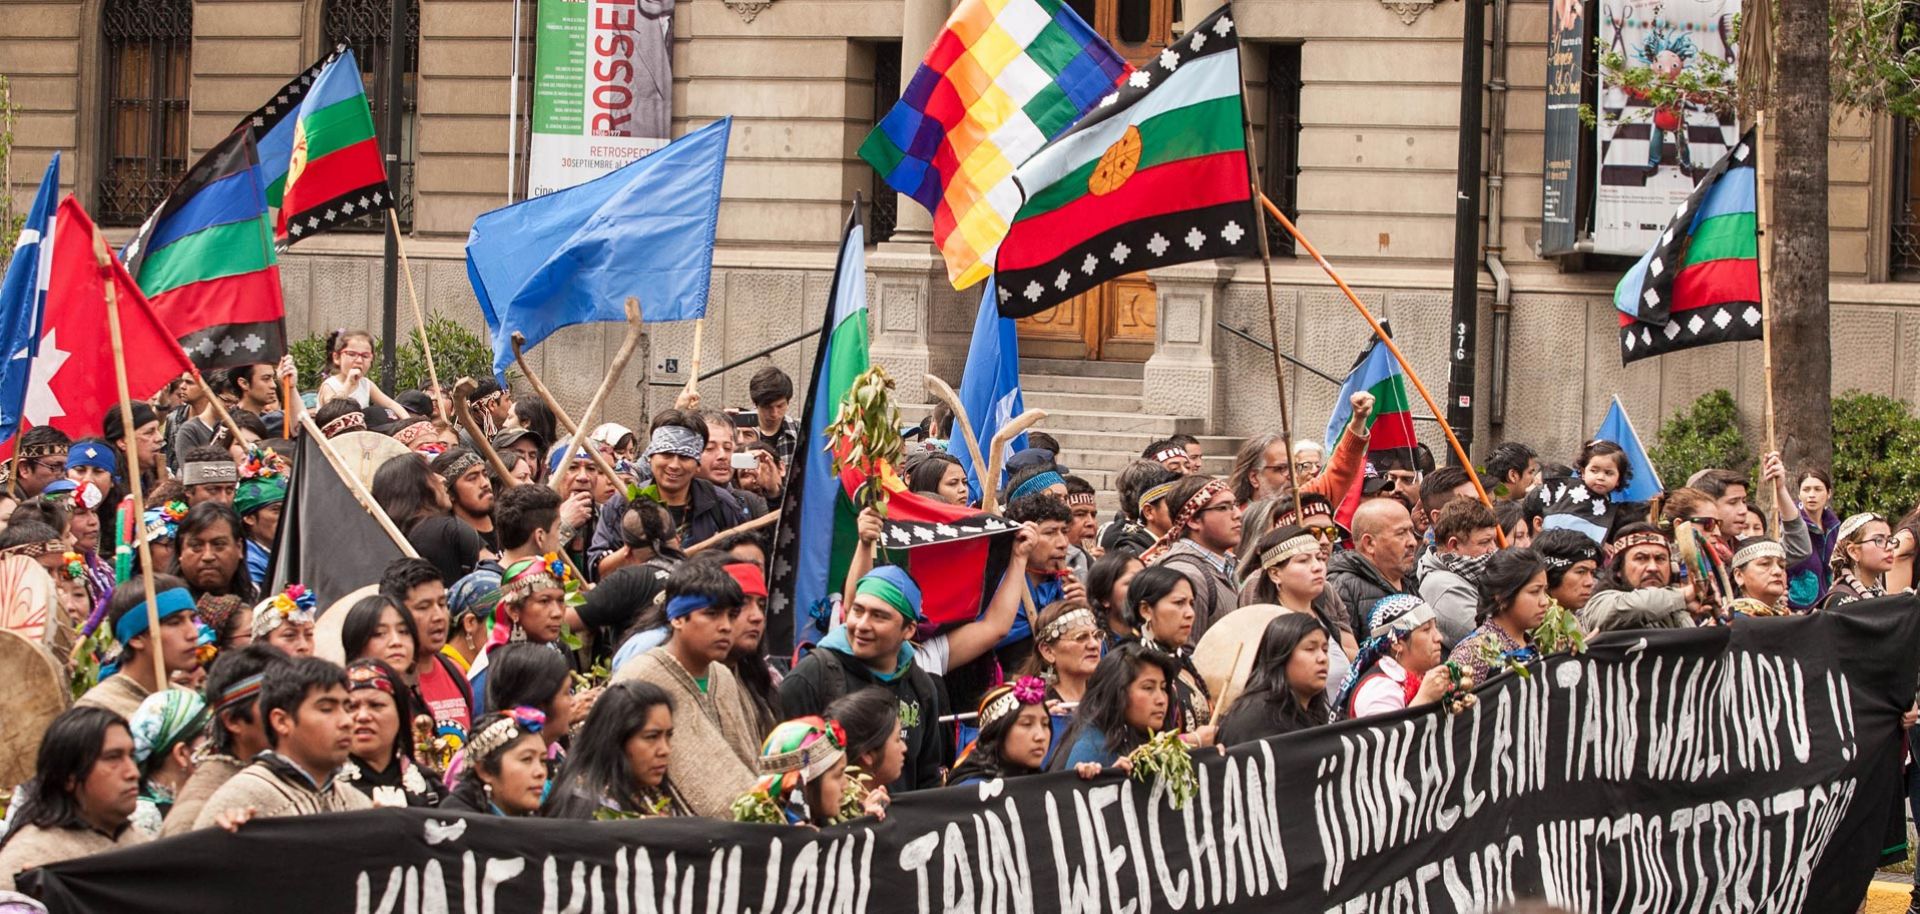 Chile's largest indigenous group, the Mapuches, protest in Santiago on Oct. 12, 2015. The group is working to reclaim land taken from them during the country's military dictatorship.